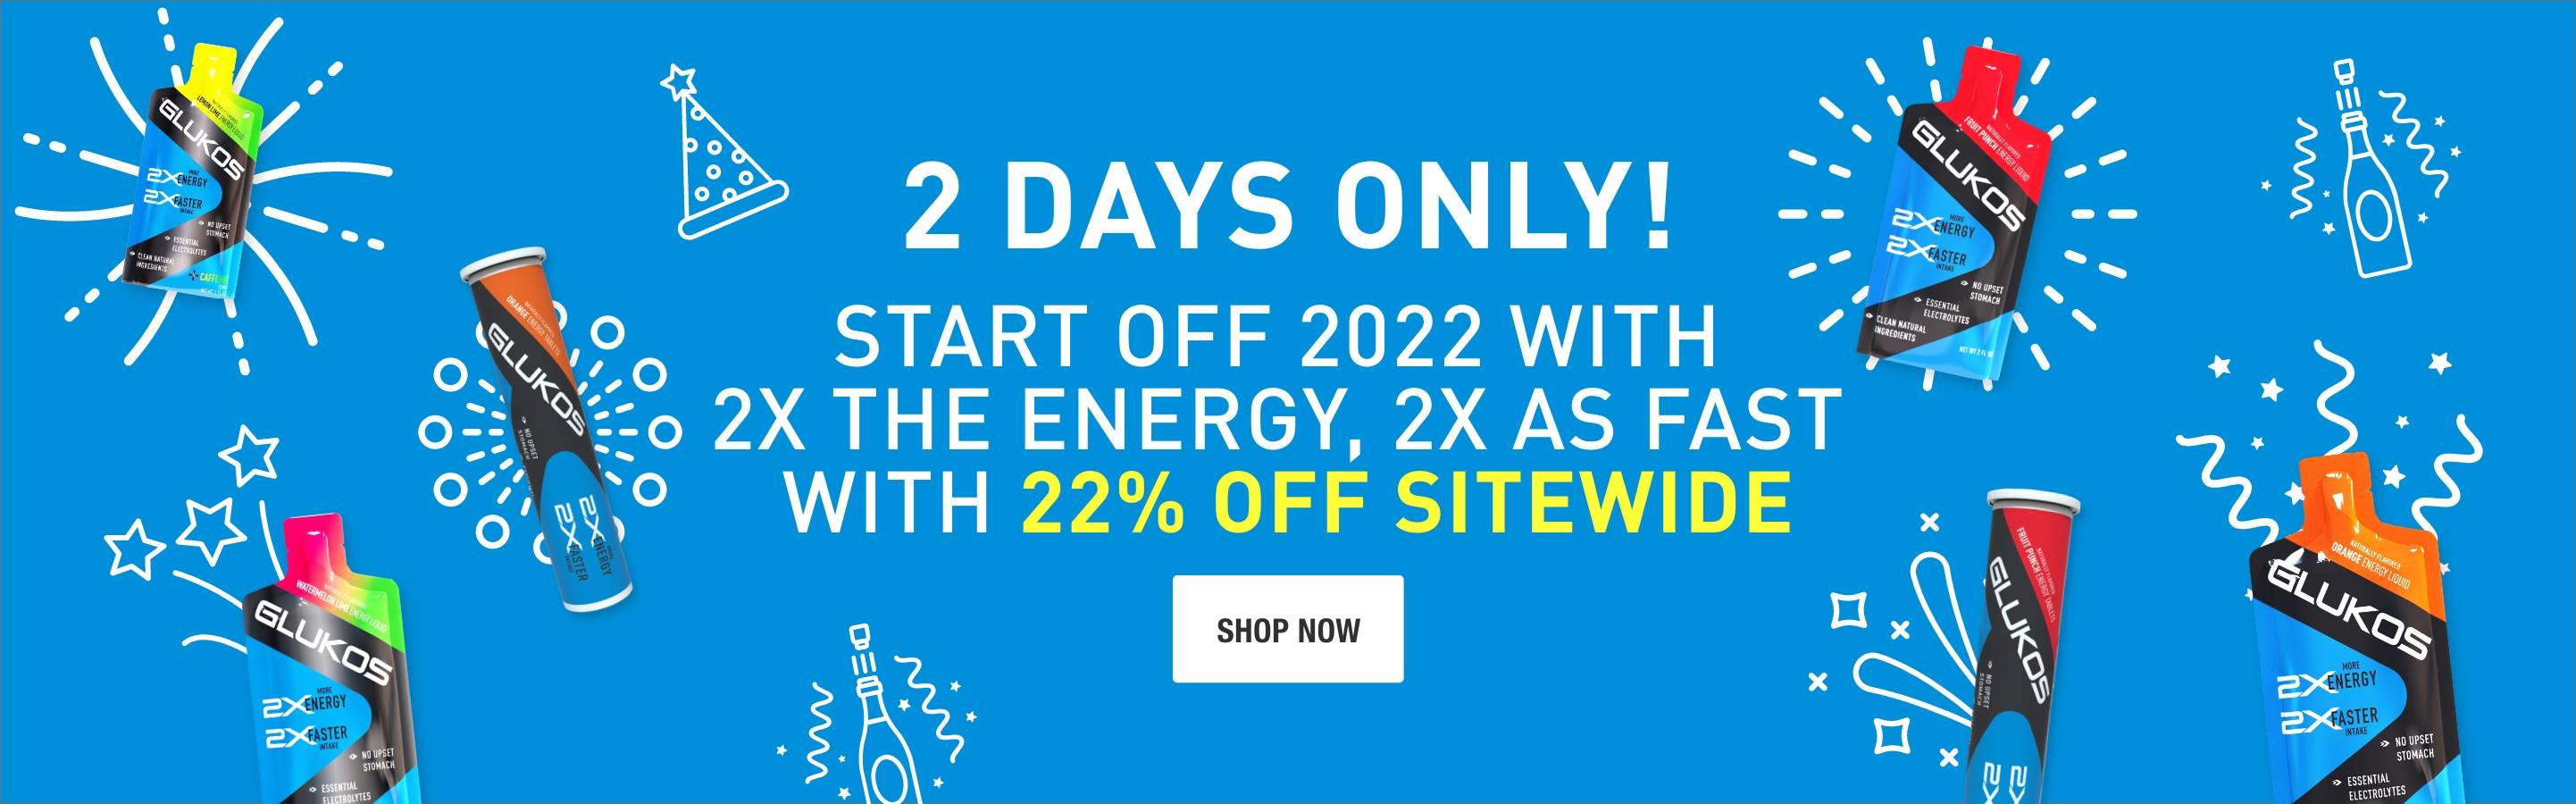 2 Days Only. Start off 2022 with 2x the energy, 2x as fast with 22% off sitewide. Shop Now